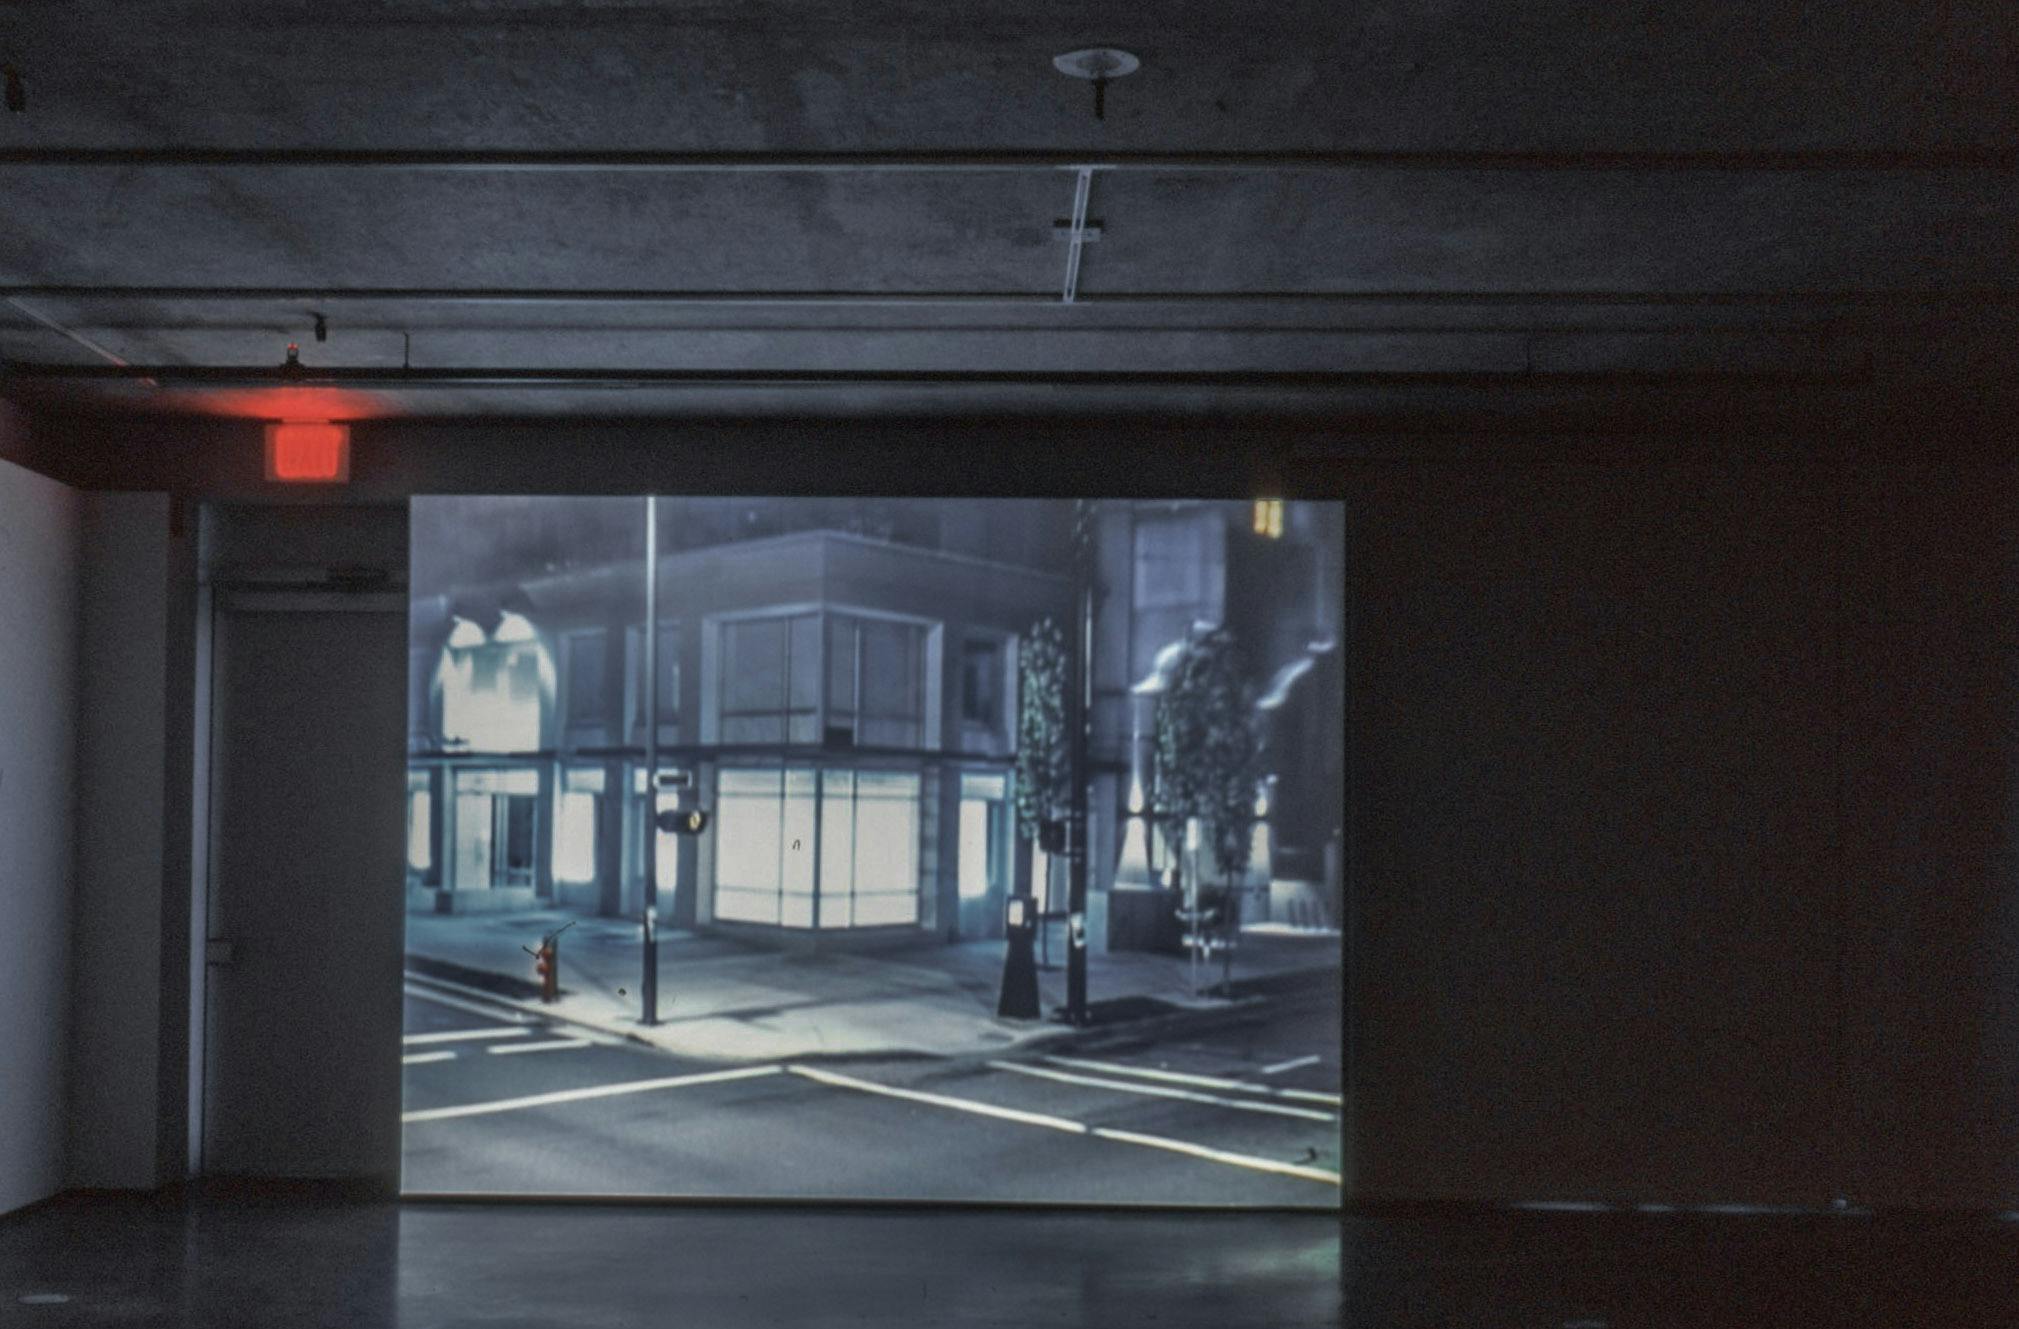 This is a video work projected on a screen installed in a darkened gallery. The screen shows the illuminated exterior of the CAG building during the night. 